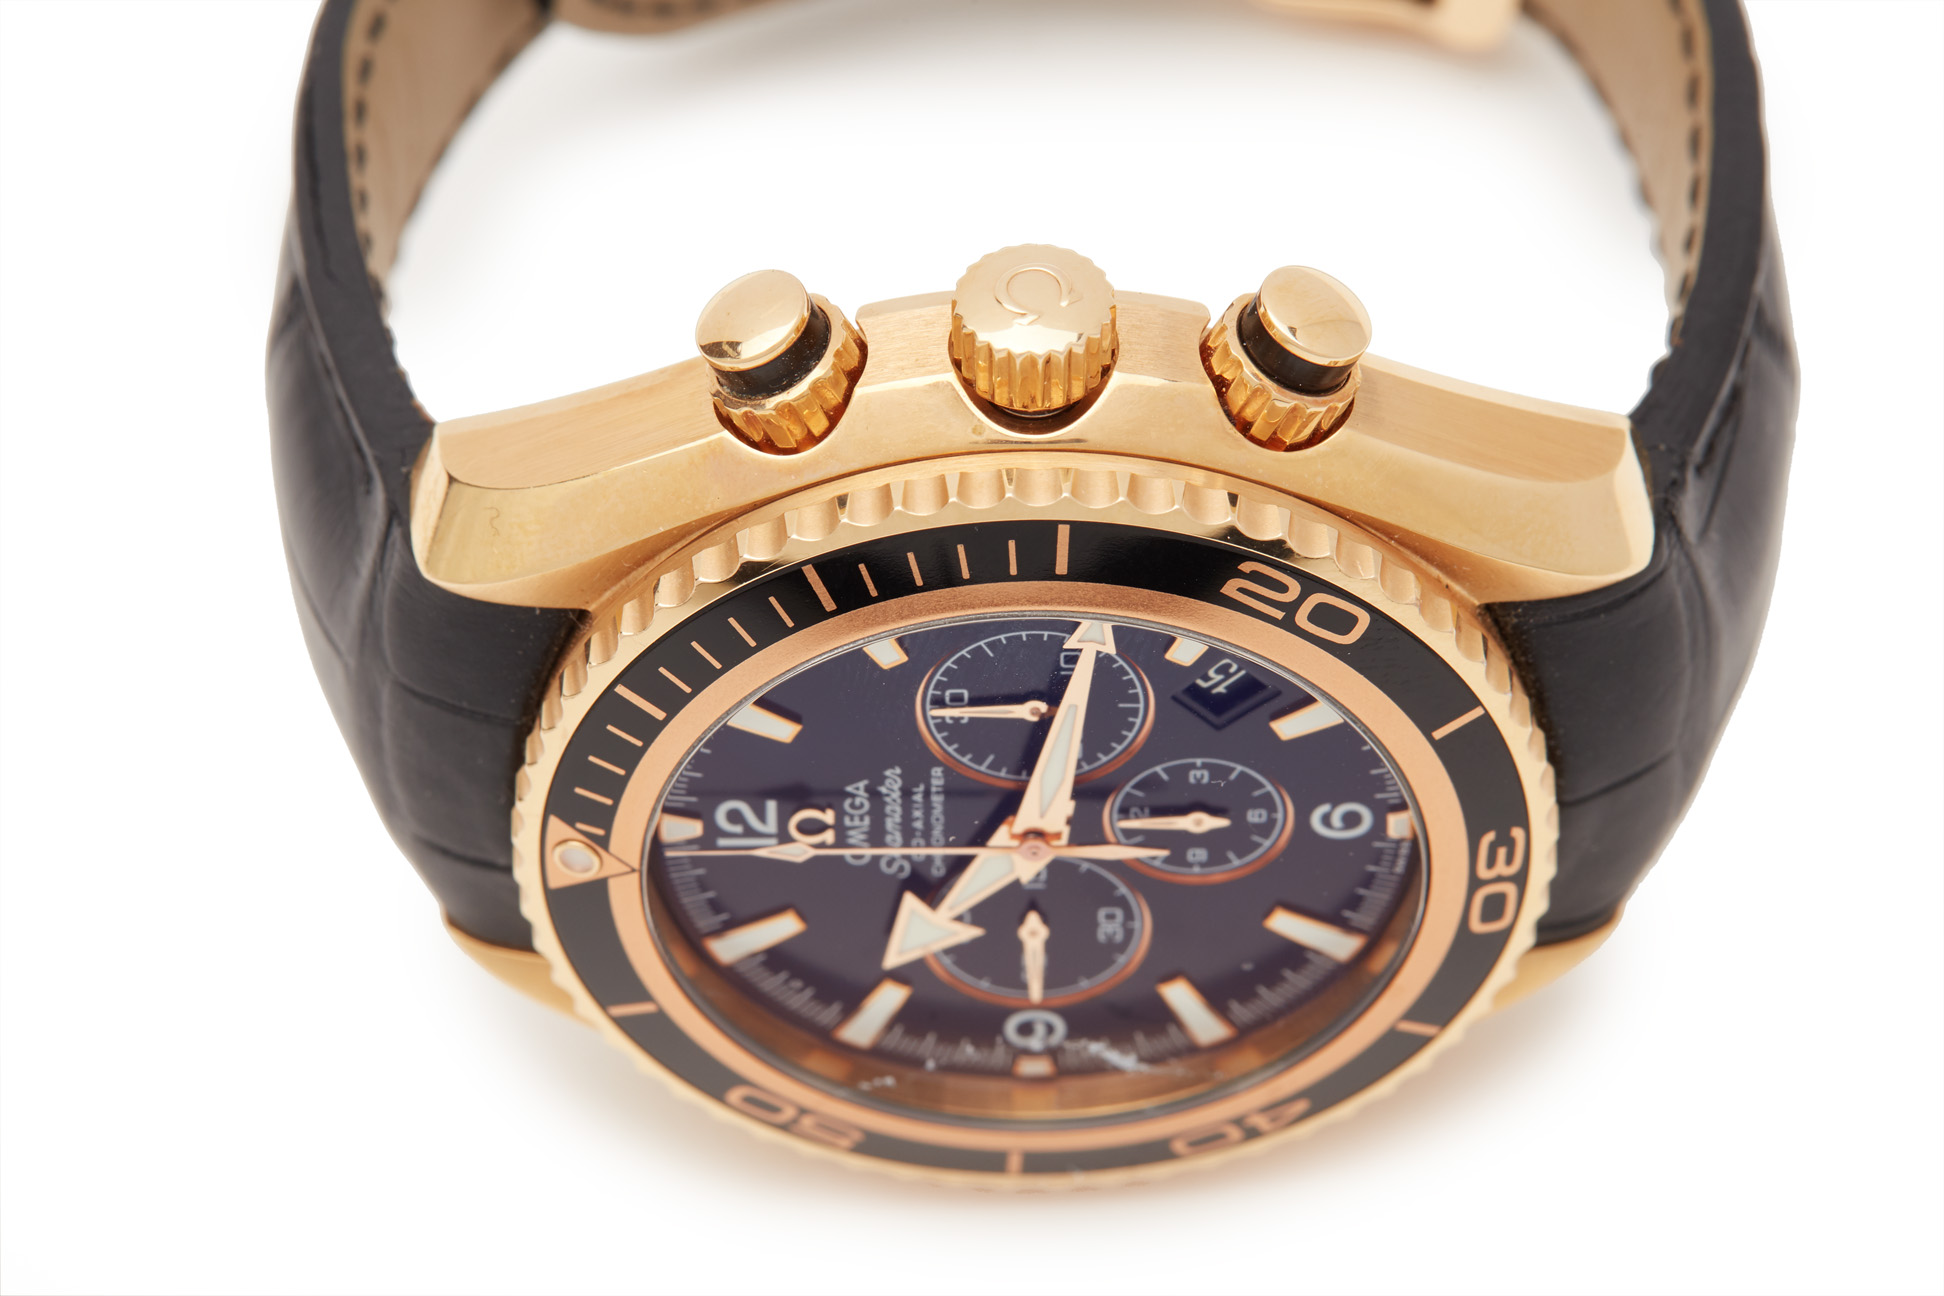 OMEGA SEAMASTER PLANET OCEAN GOLD CHRONOGRAPH WATCH - Image 7 of 7